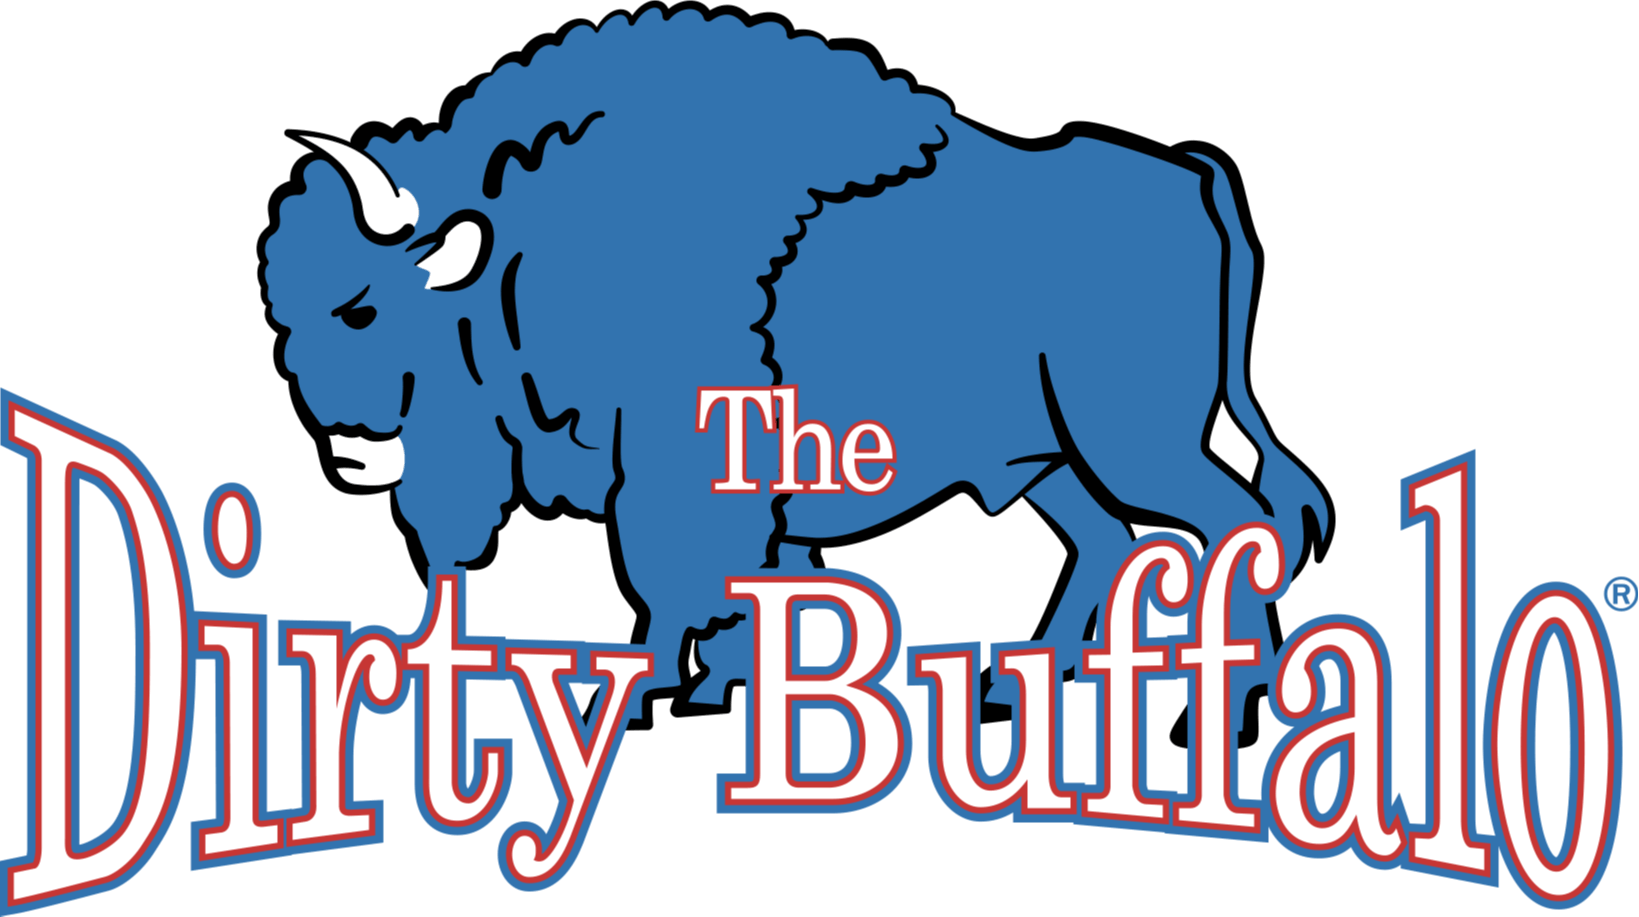 The Dirty Buffalo - Colley Ave